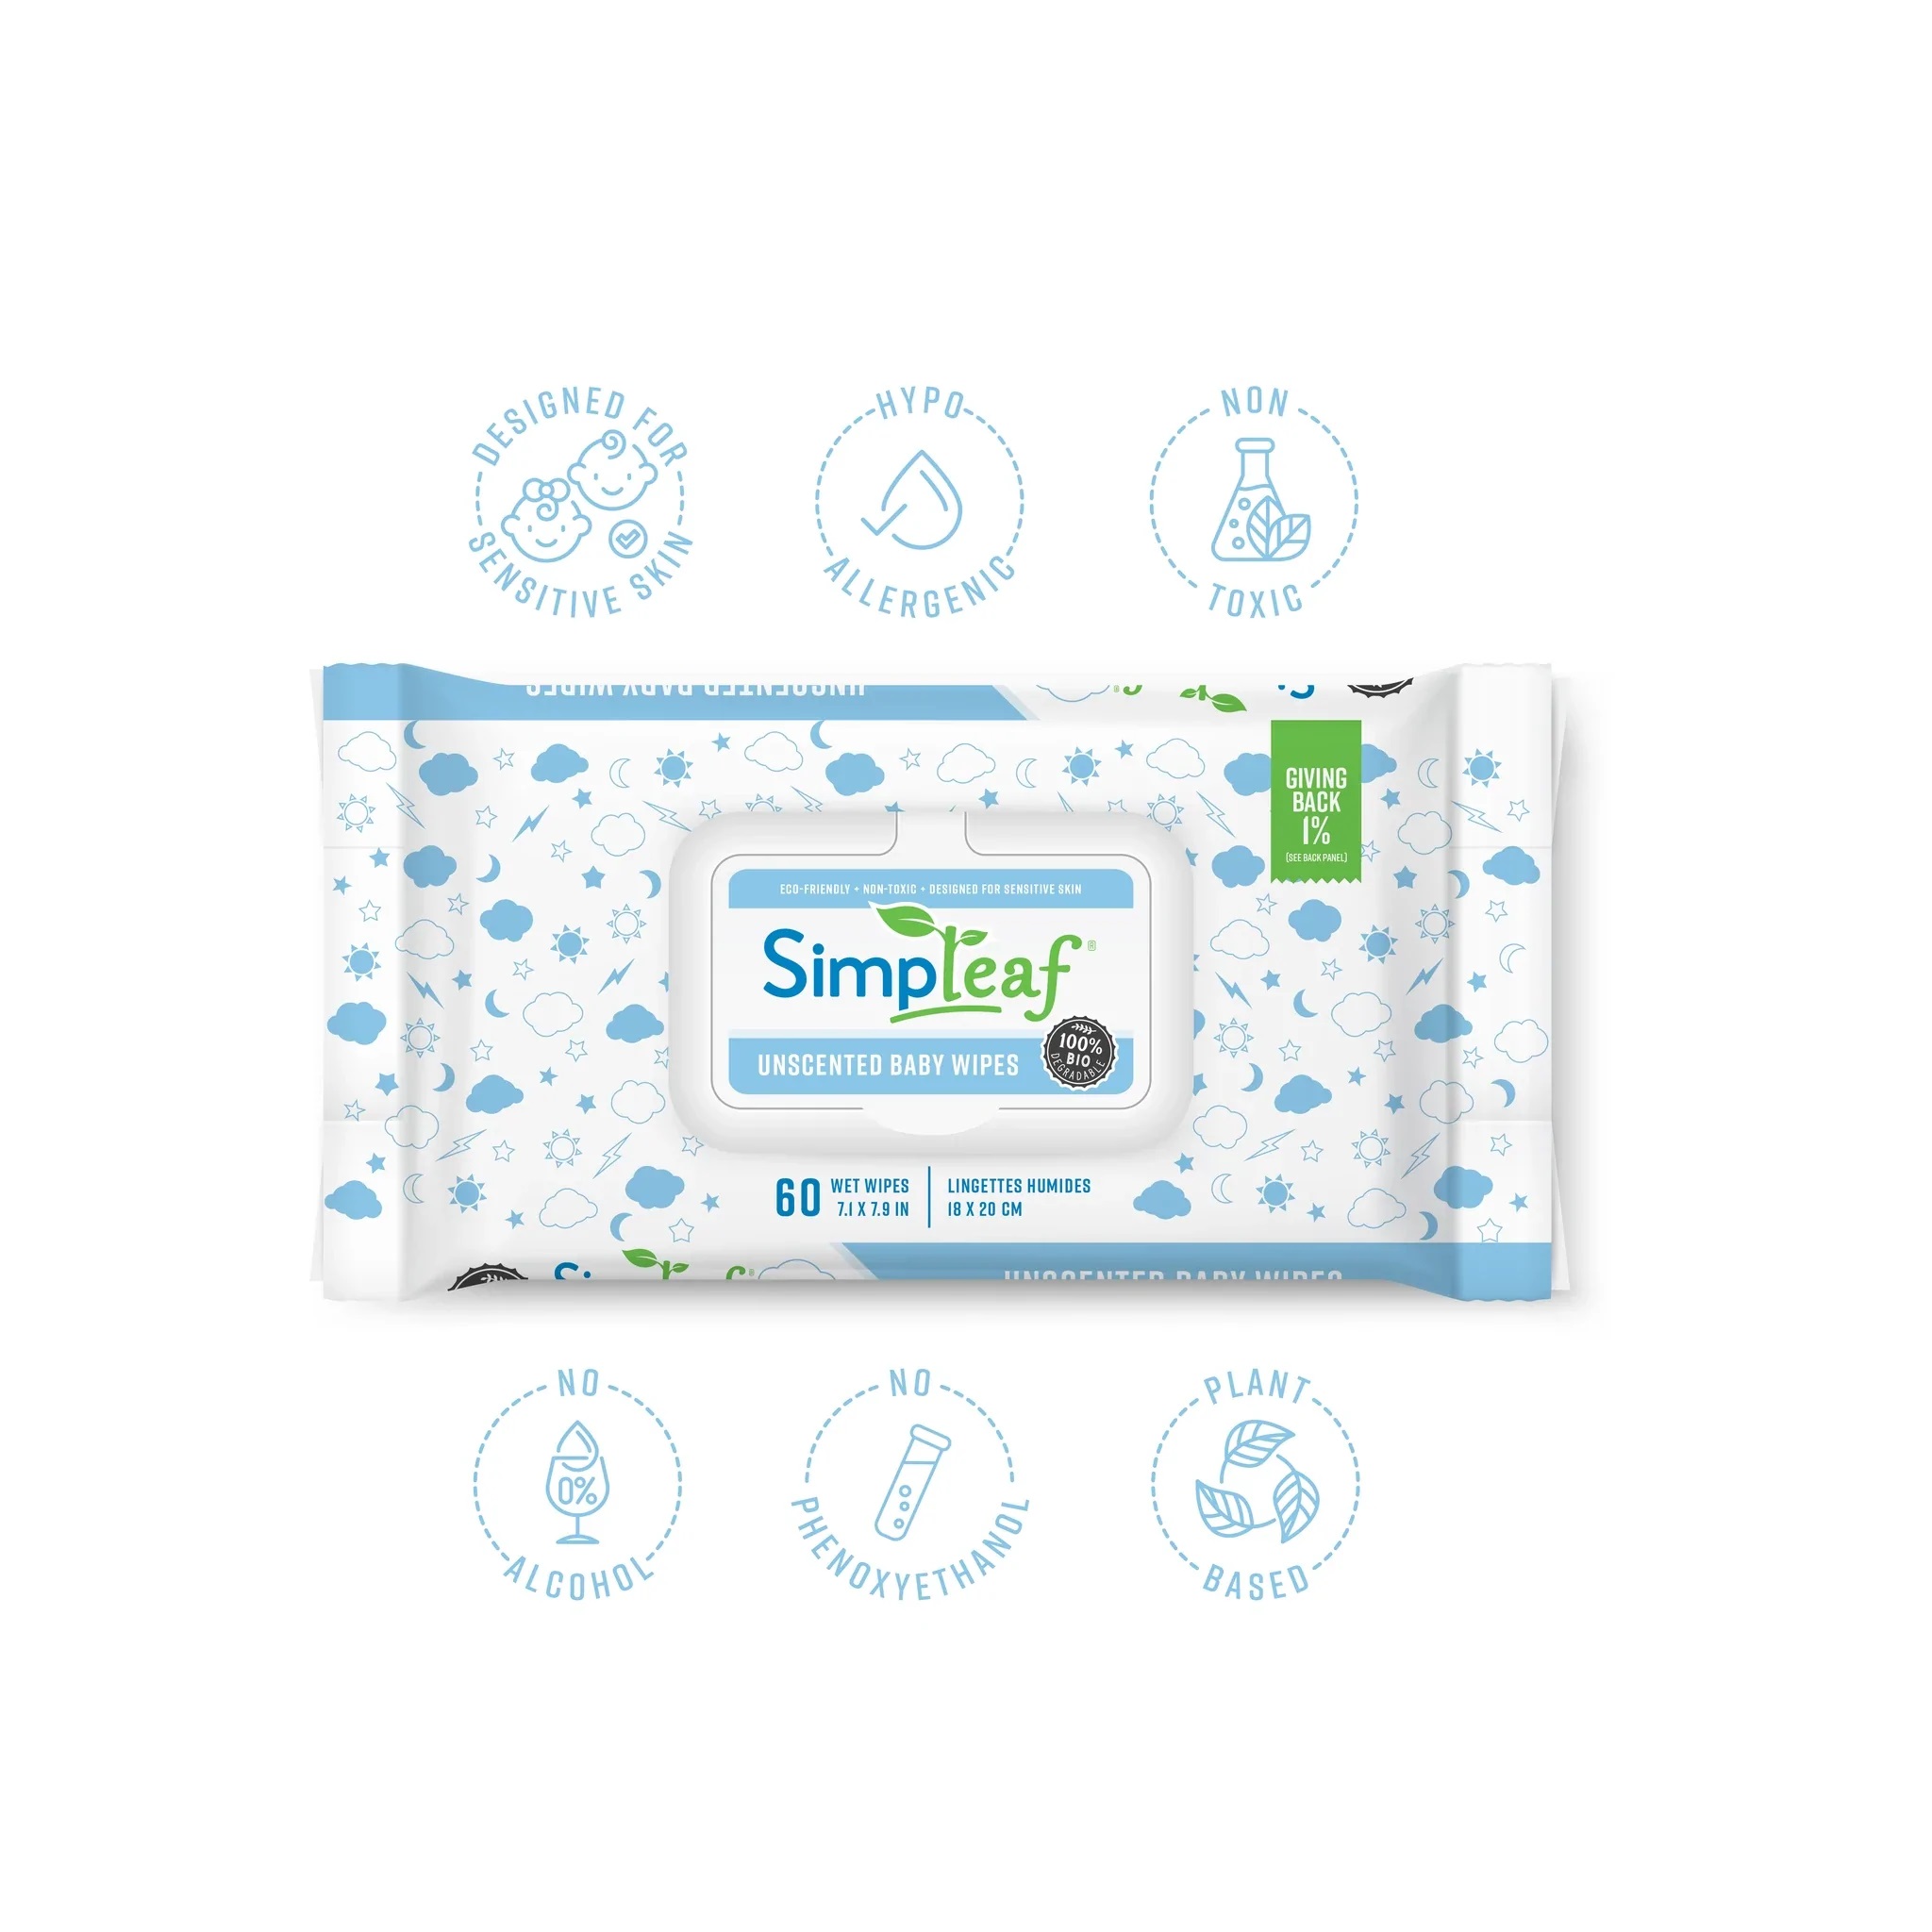 Simpleaf Unscented Baby Wipes Black-Owned